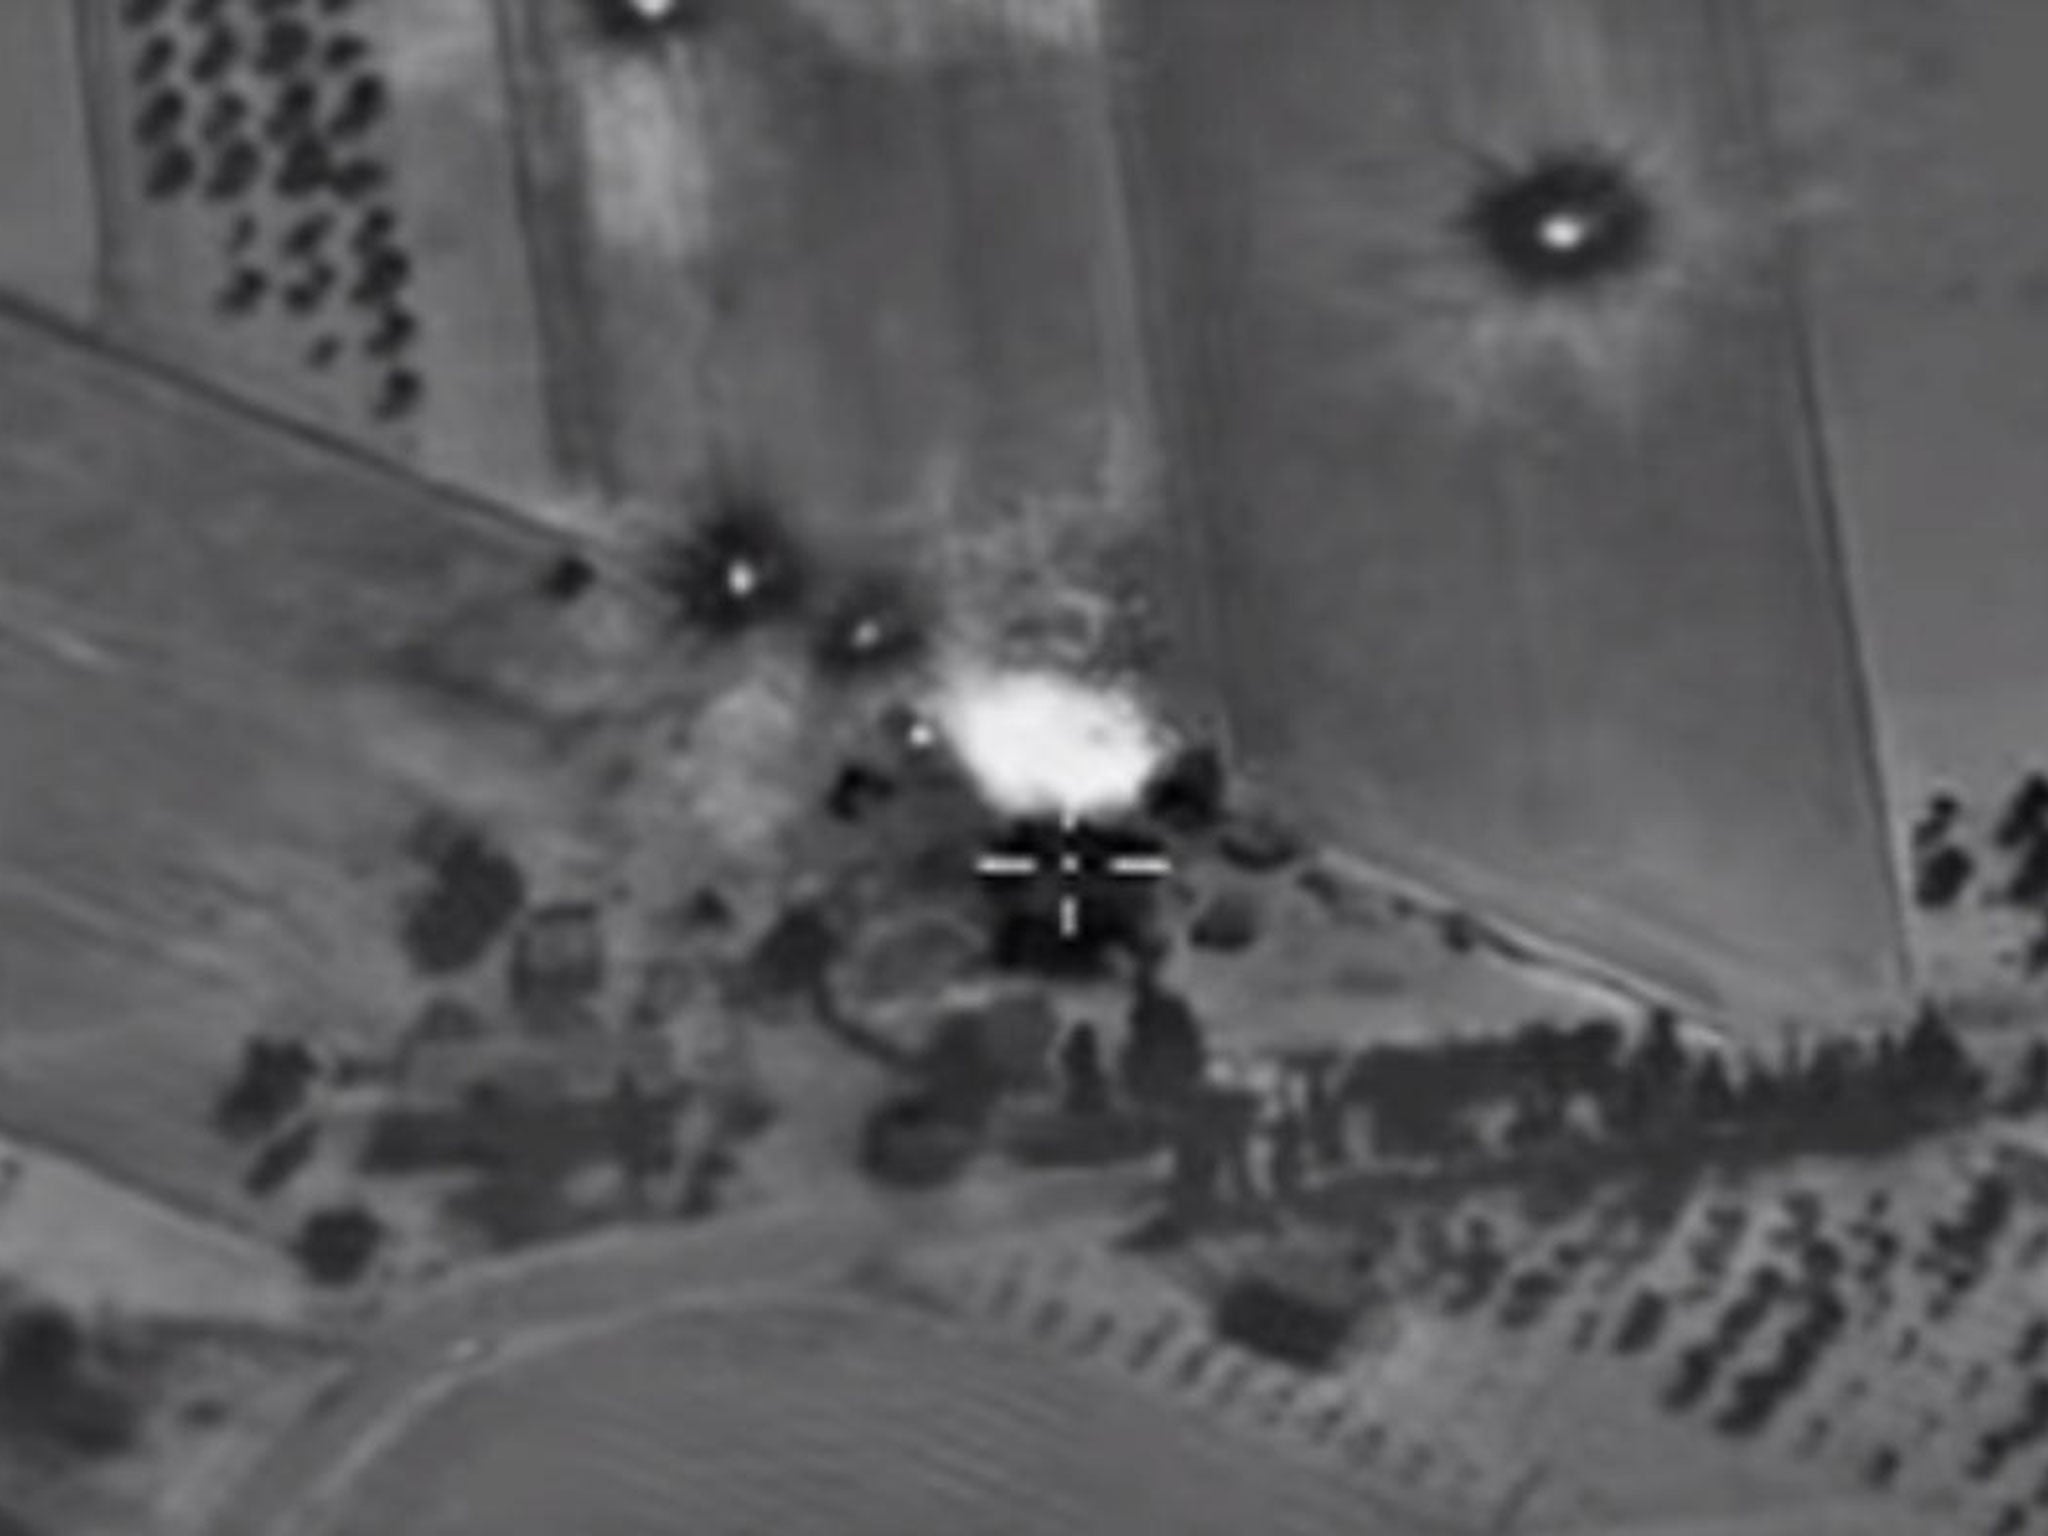 The video claimed to show four air strikes on Isis positions overnight on 1 October